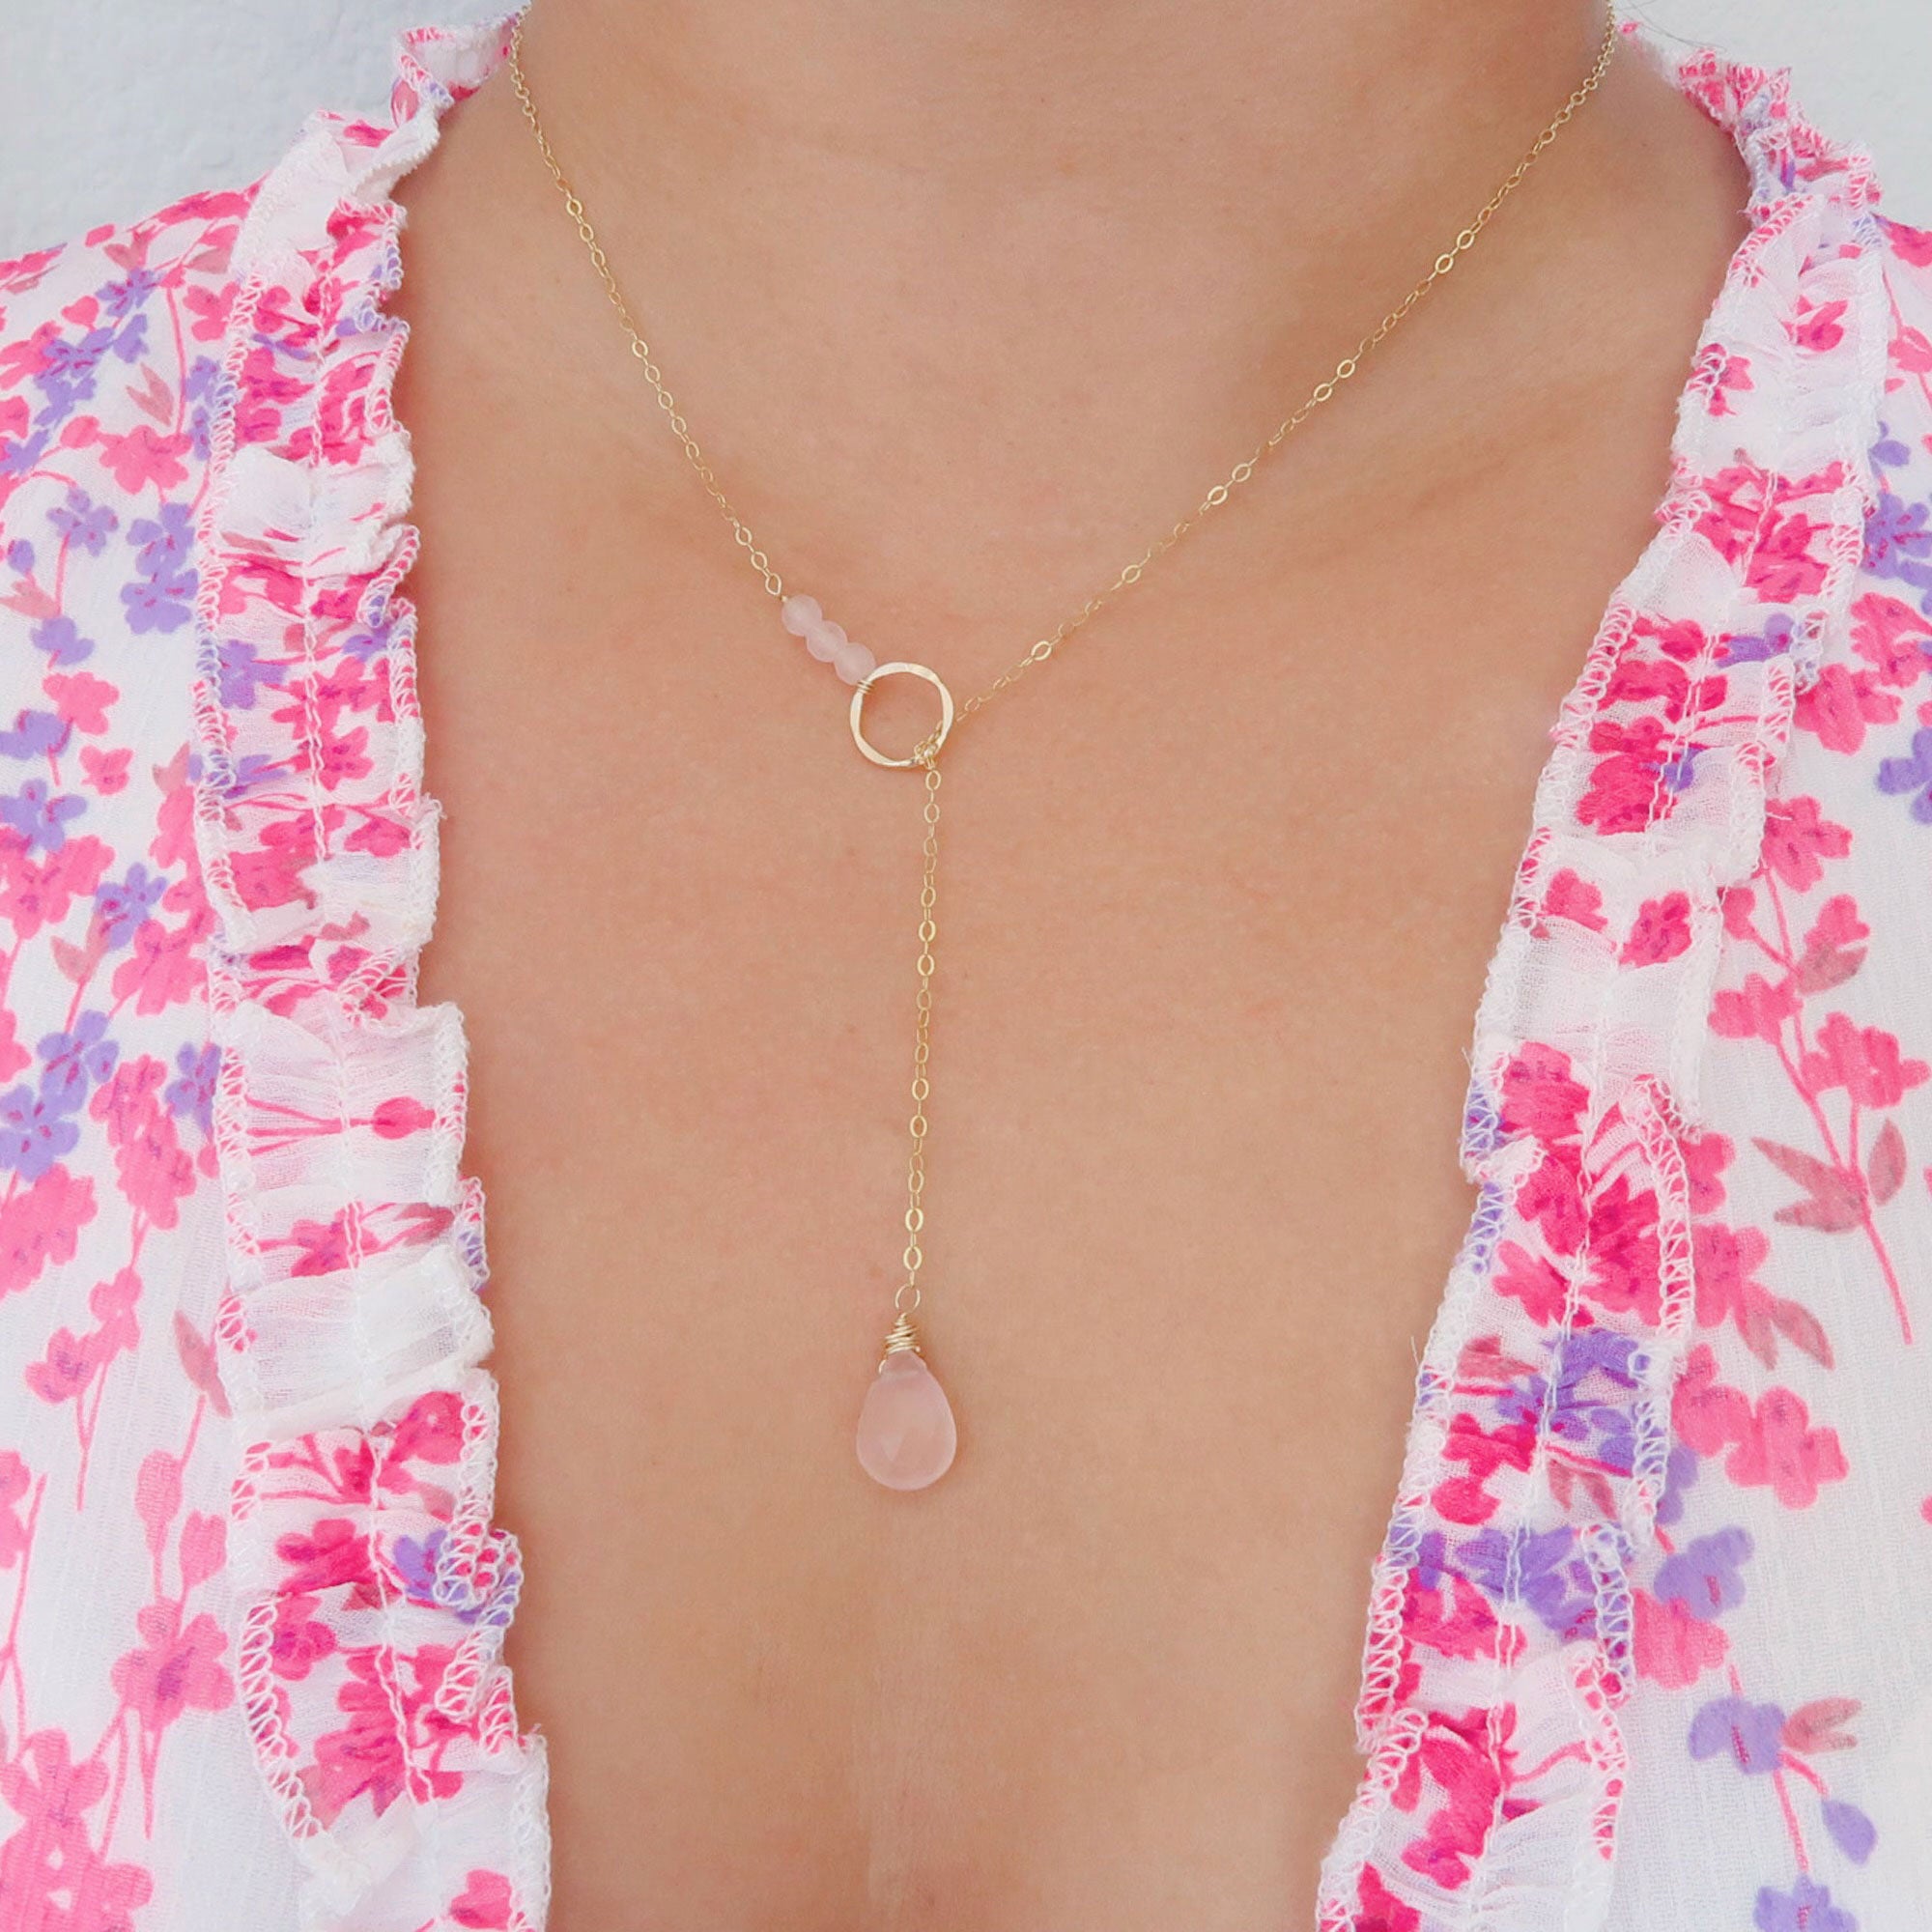 Rose Quartz 14k Gold Filled Necklace. Heart Chakra Healing necklace to help welcome new love.